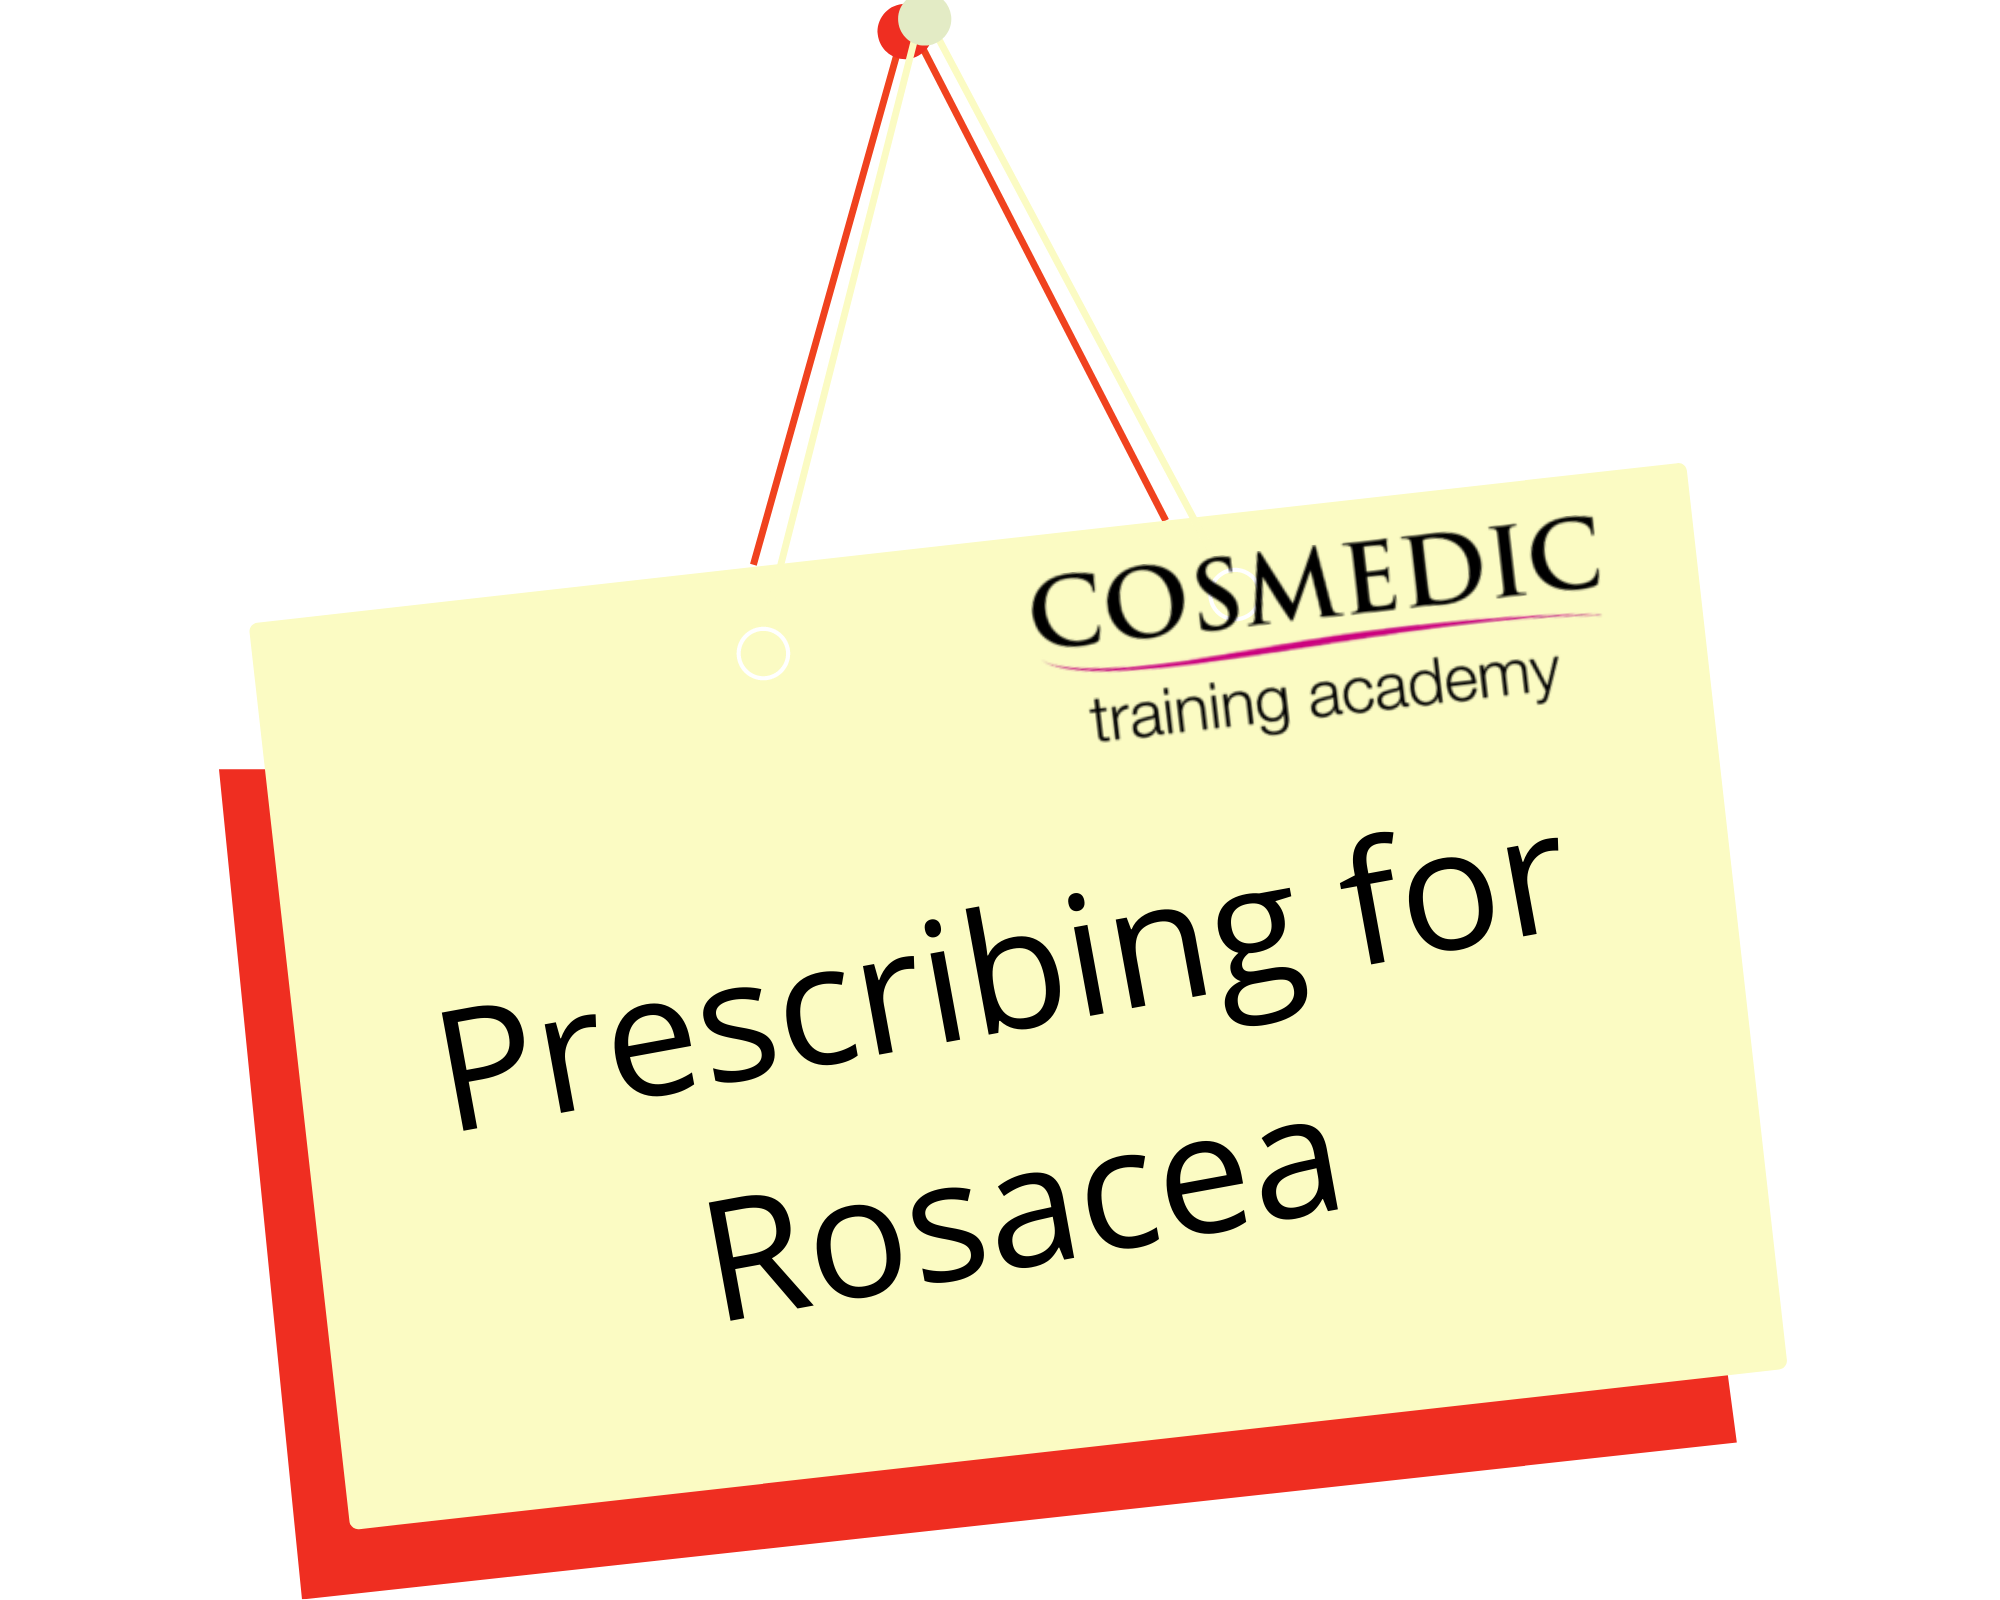 Protected: Prescribing For The Treatment of Rosacea